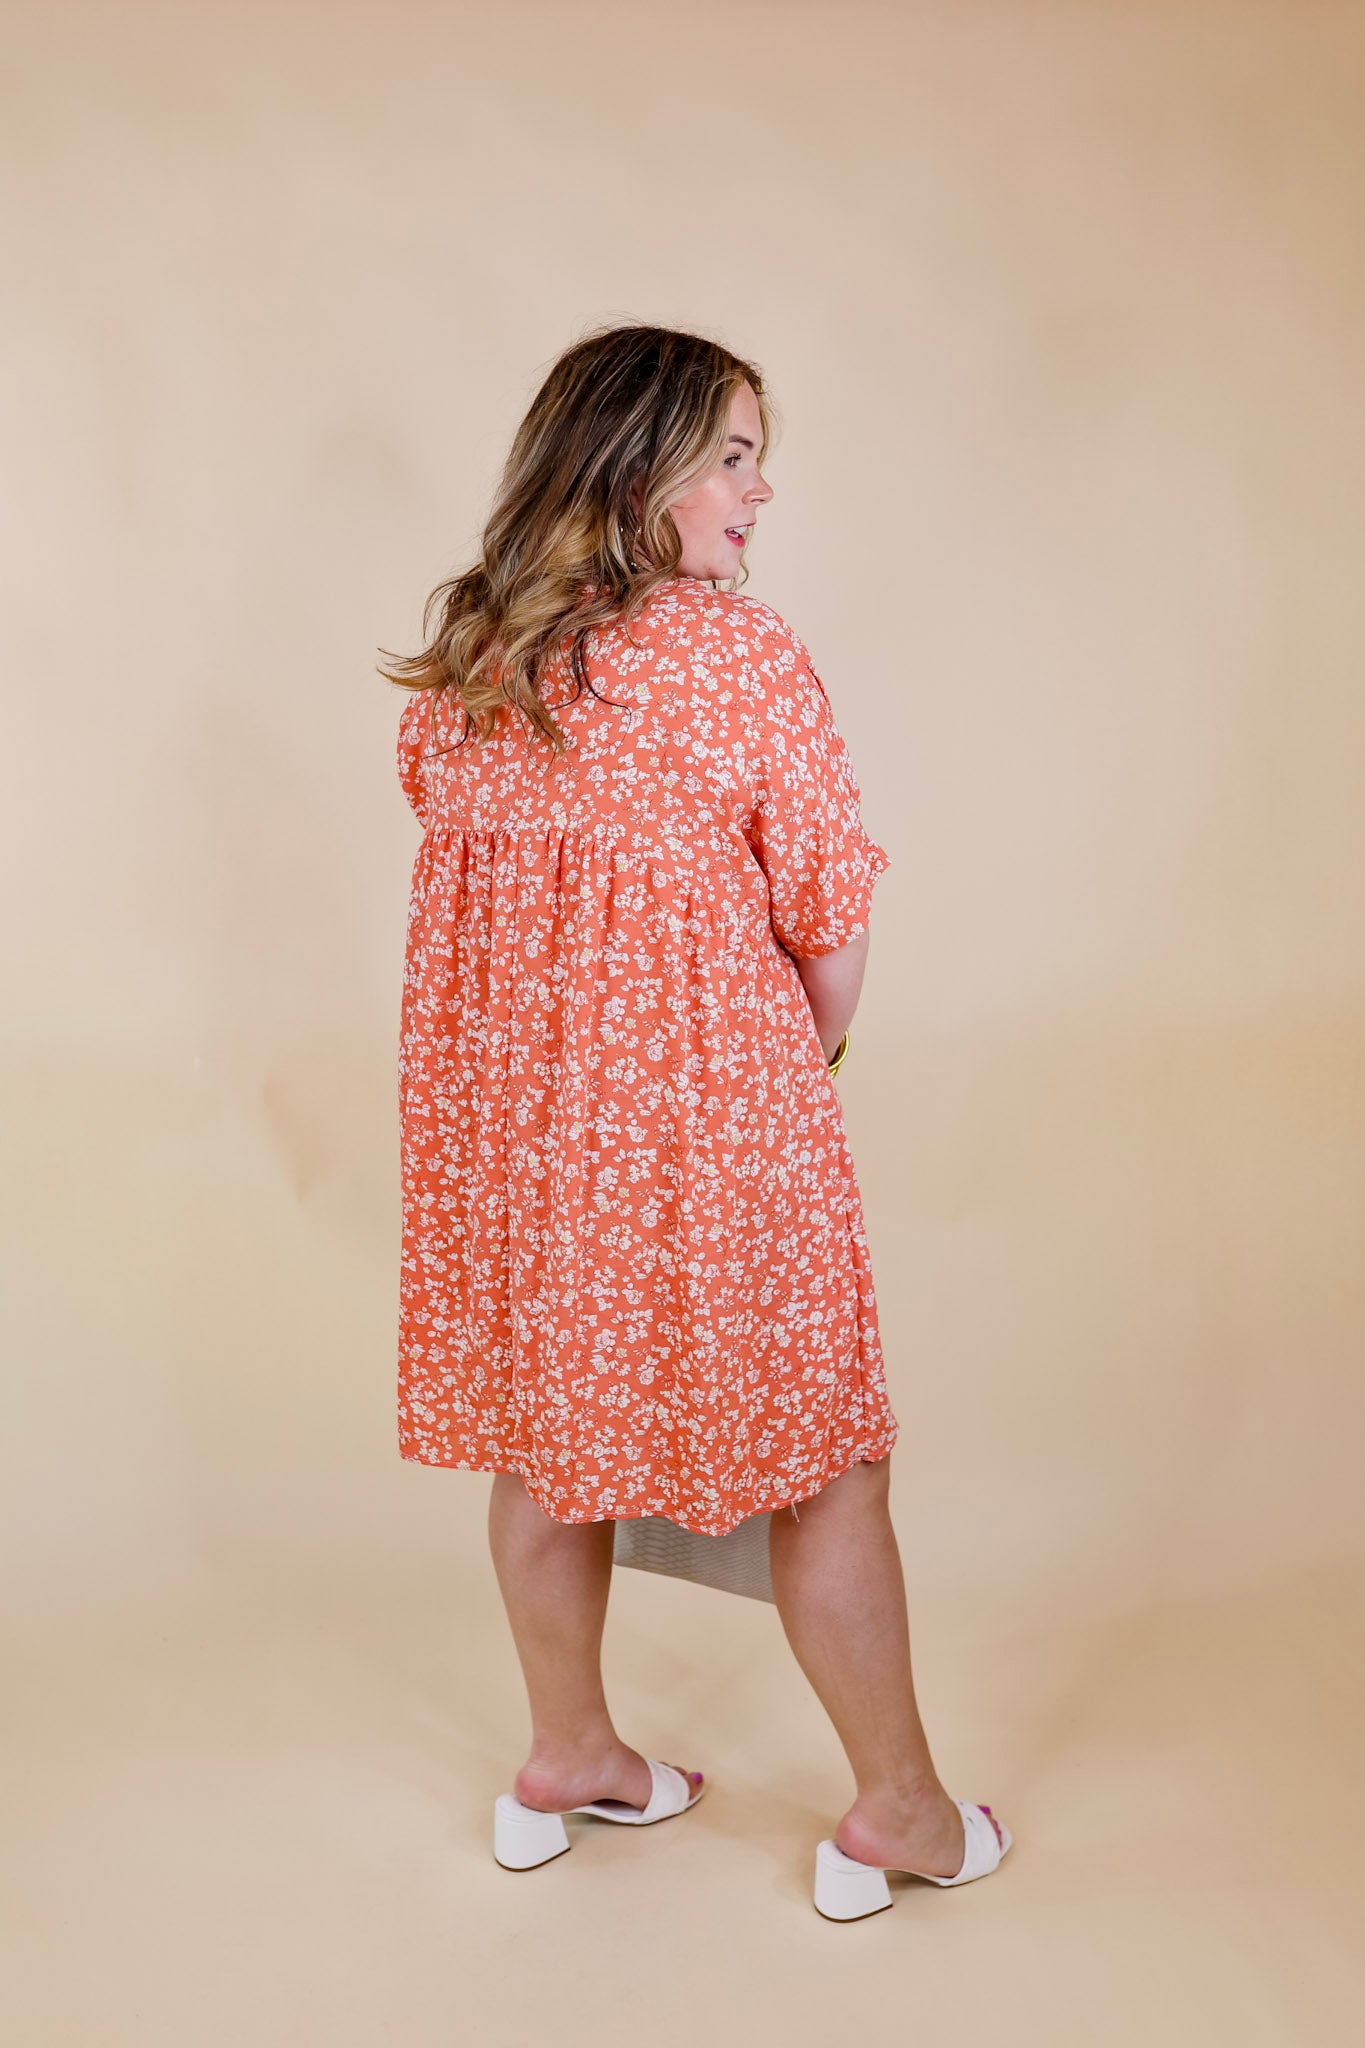 Beauty In Blooms Floral Print Babydoll Dress in Coral Orange - Giddy Up Glamour Boutique